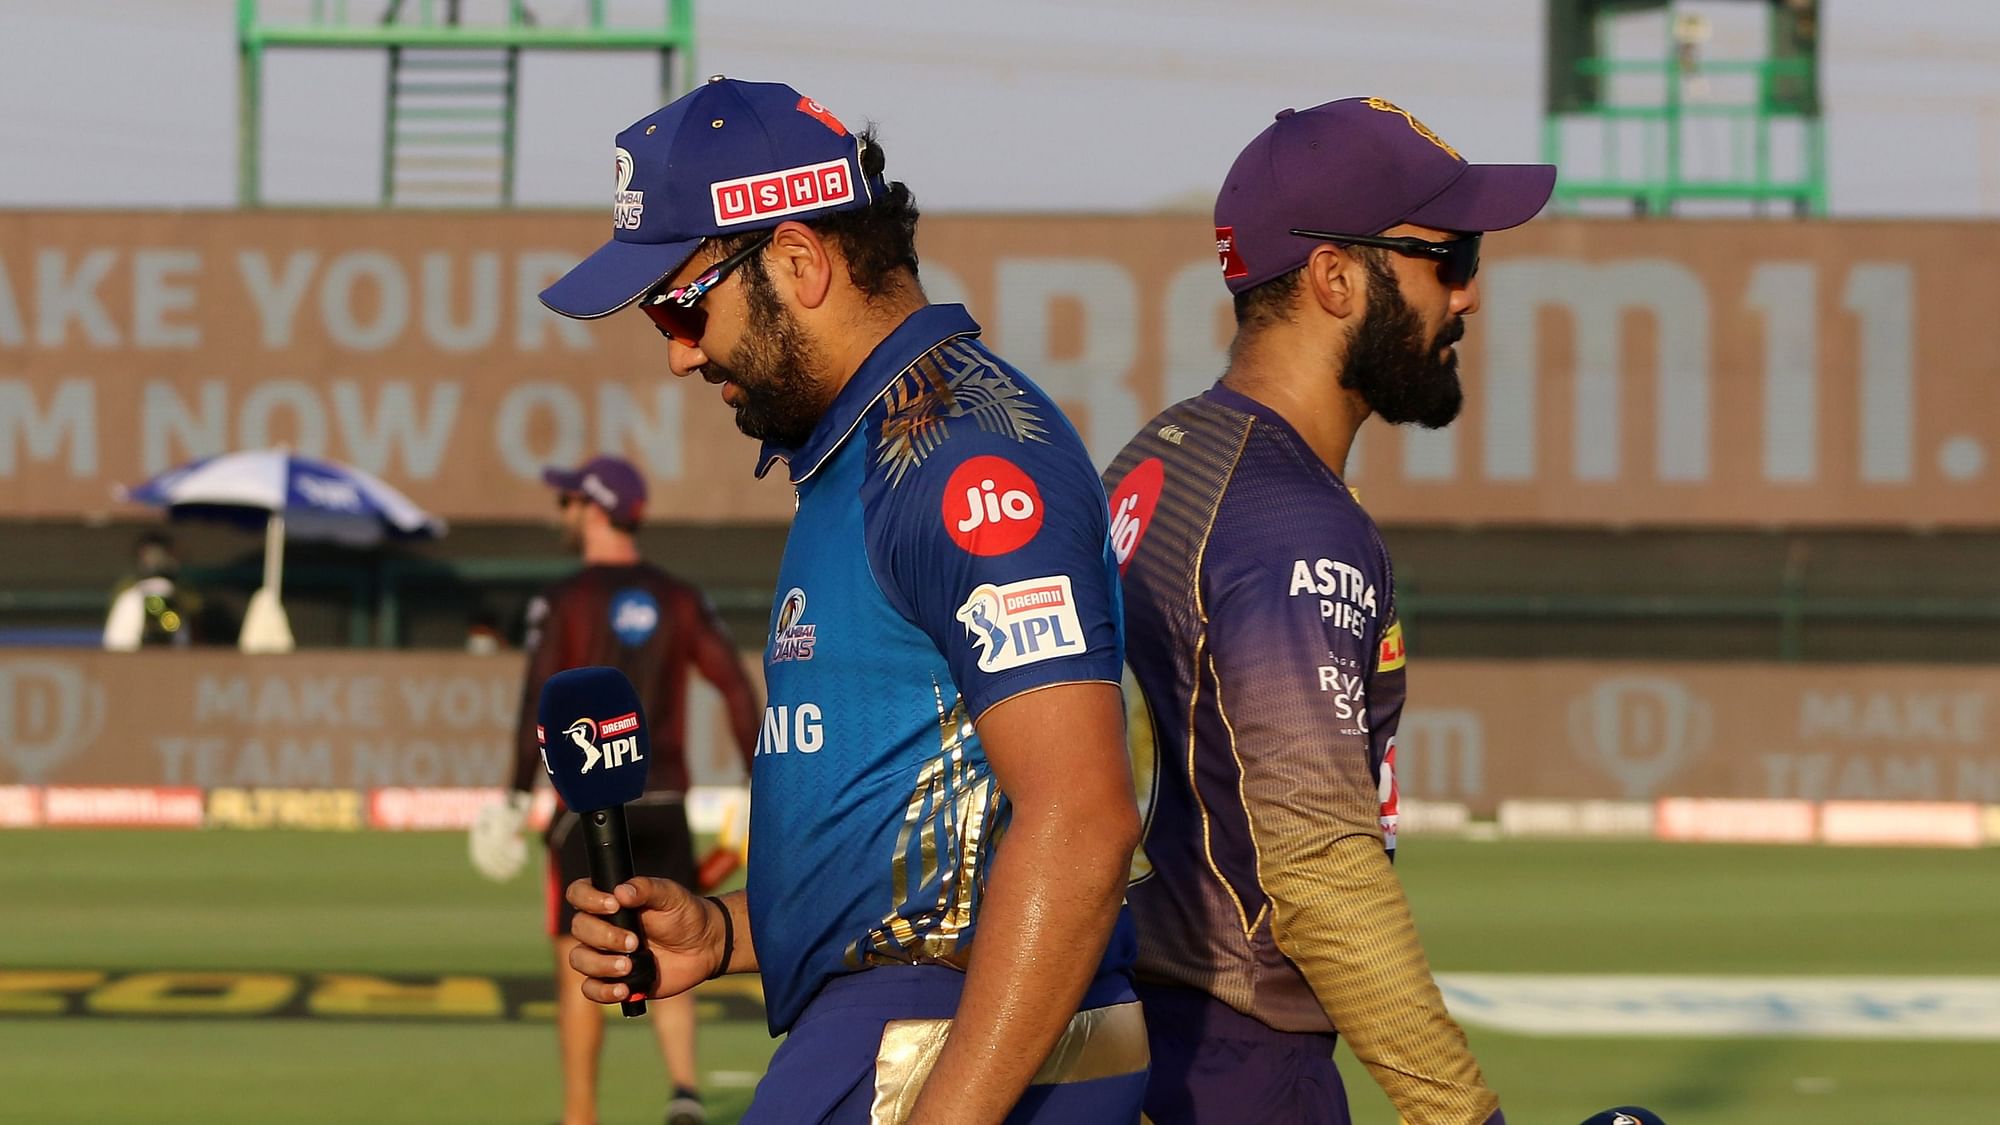 Dinesh Karthik captain of Kolkata Knight Riders and Rohit Sharma captain of Mumbai Indians during the toss of the match 5 of season 13 of the Dream 11 Indian Premier League (IPL) between the Kolkata Knight Riders and the Mumbai Indians.